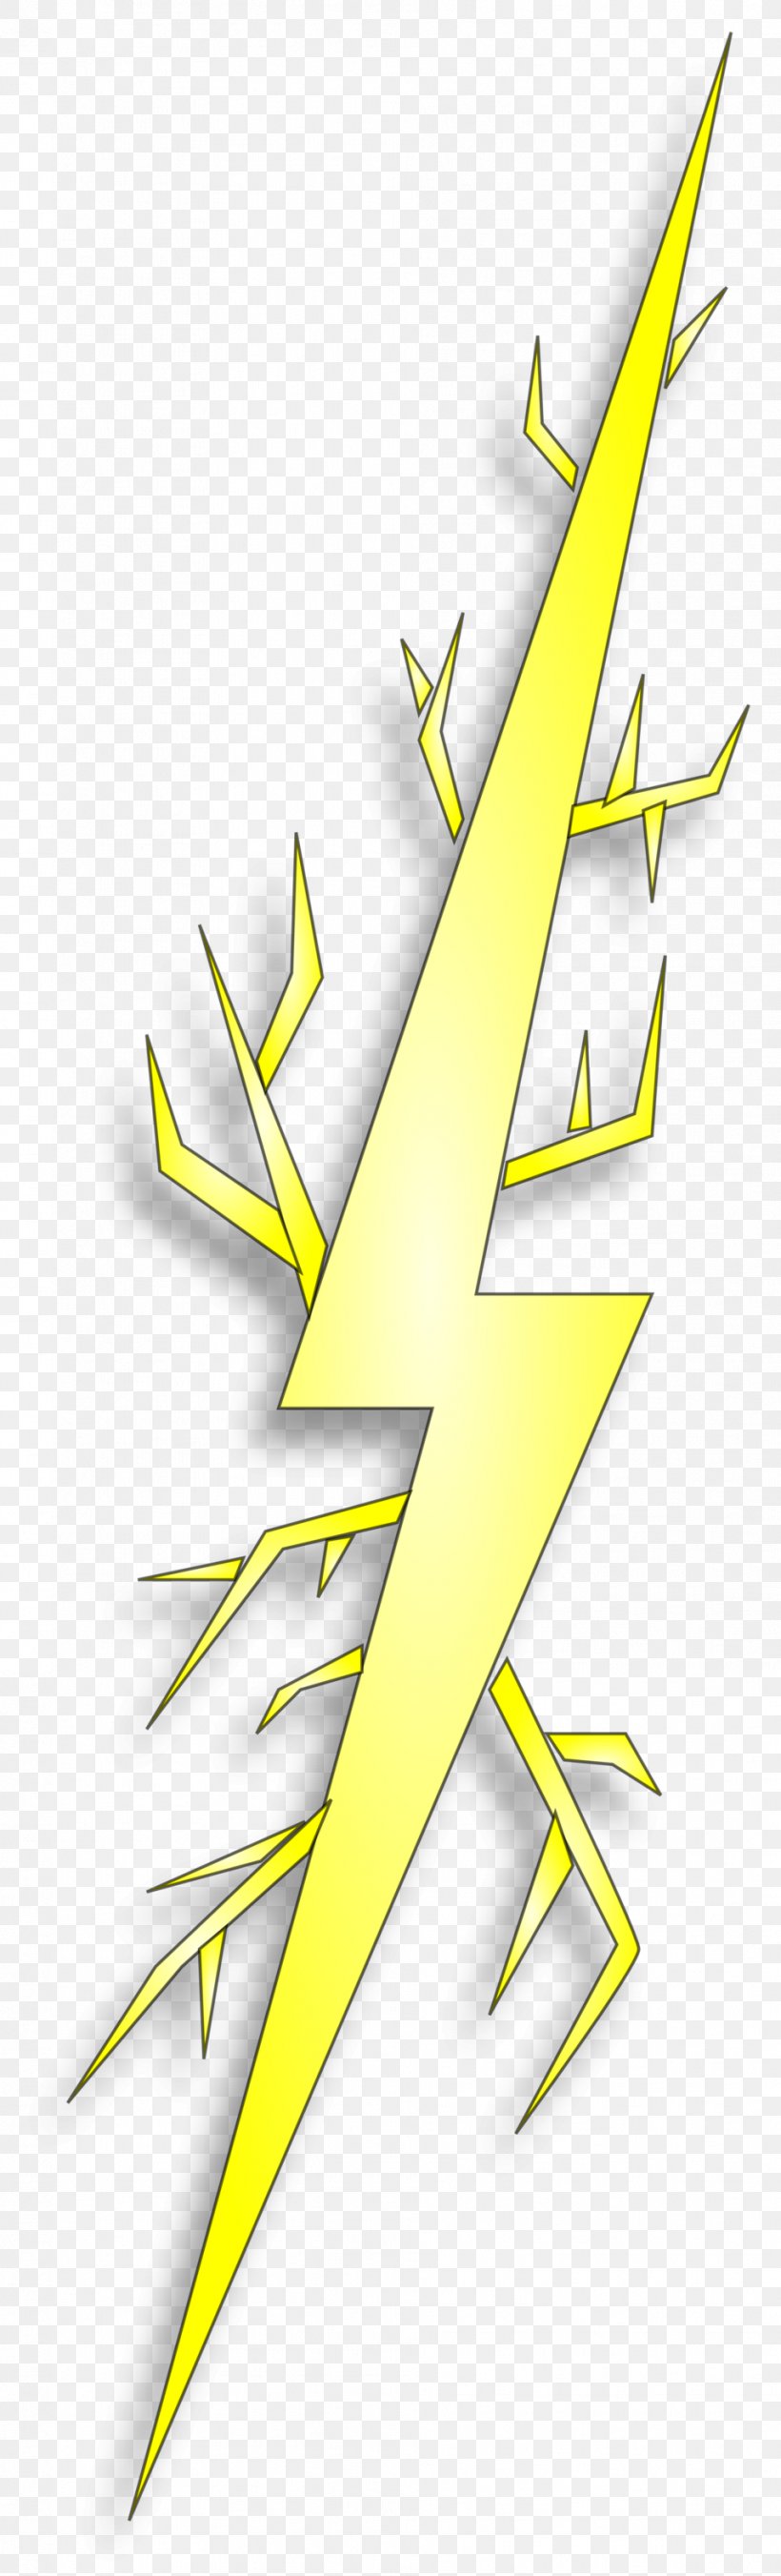 Electric Spark Clip Art, PNG, 958x3158px, Electric Spark, Electricity, Leaf, Lightning, Point Download Free